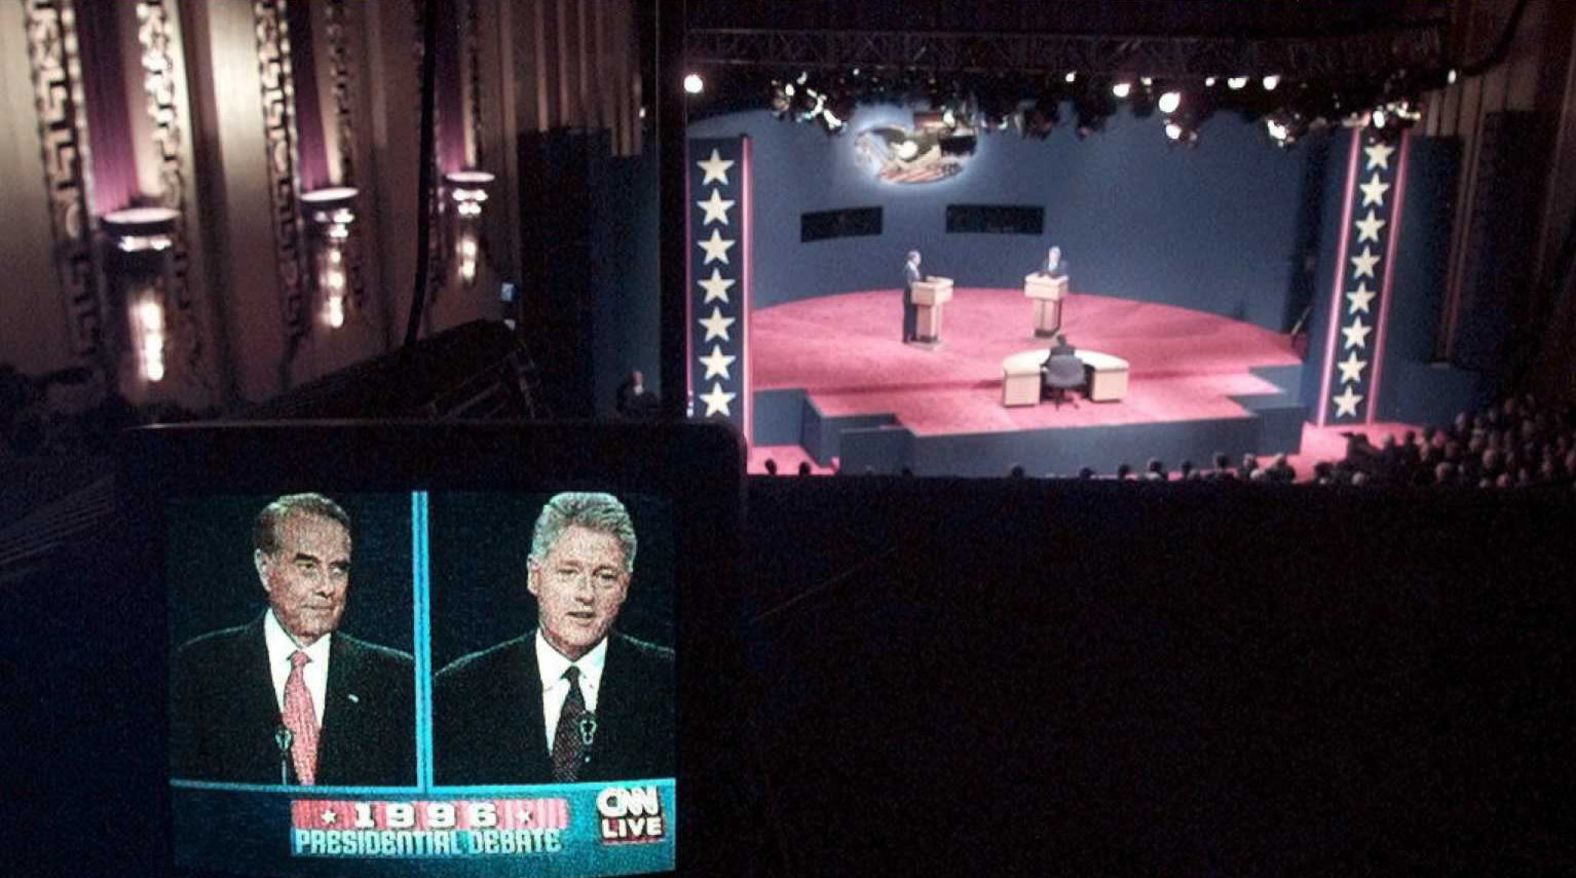 Clinton and Bob Dole debate each other at the Bushnell Memorial Theater in Hartford, Connecticut, in 1996.